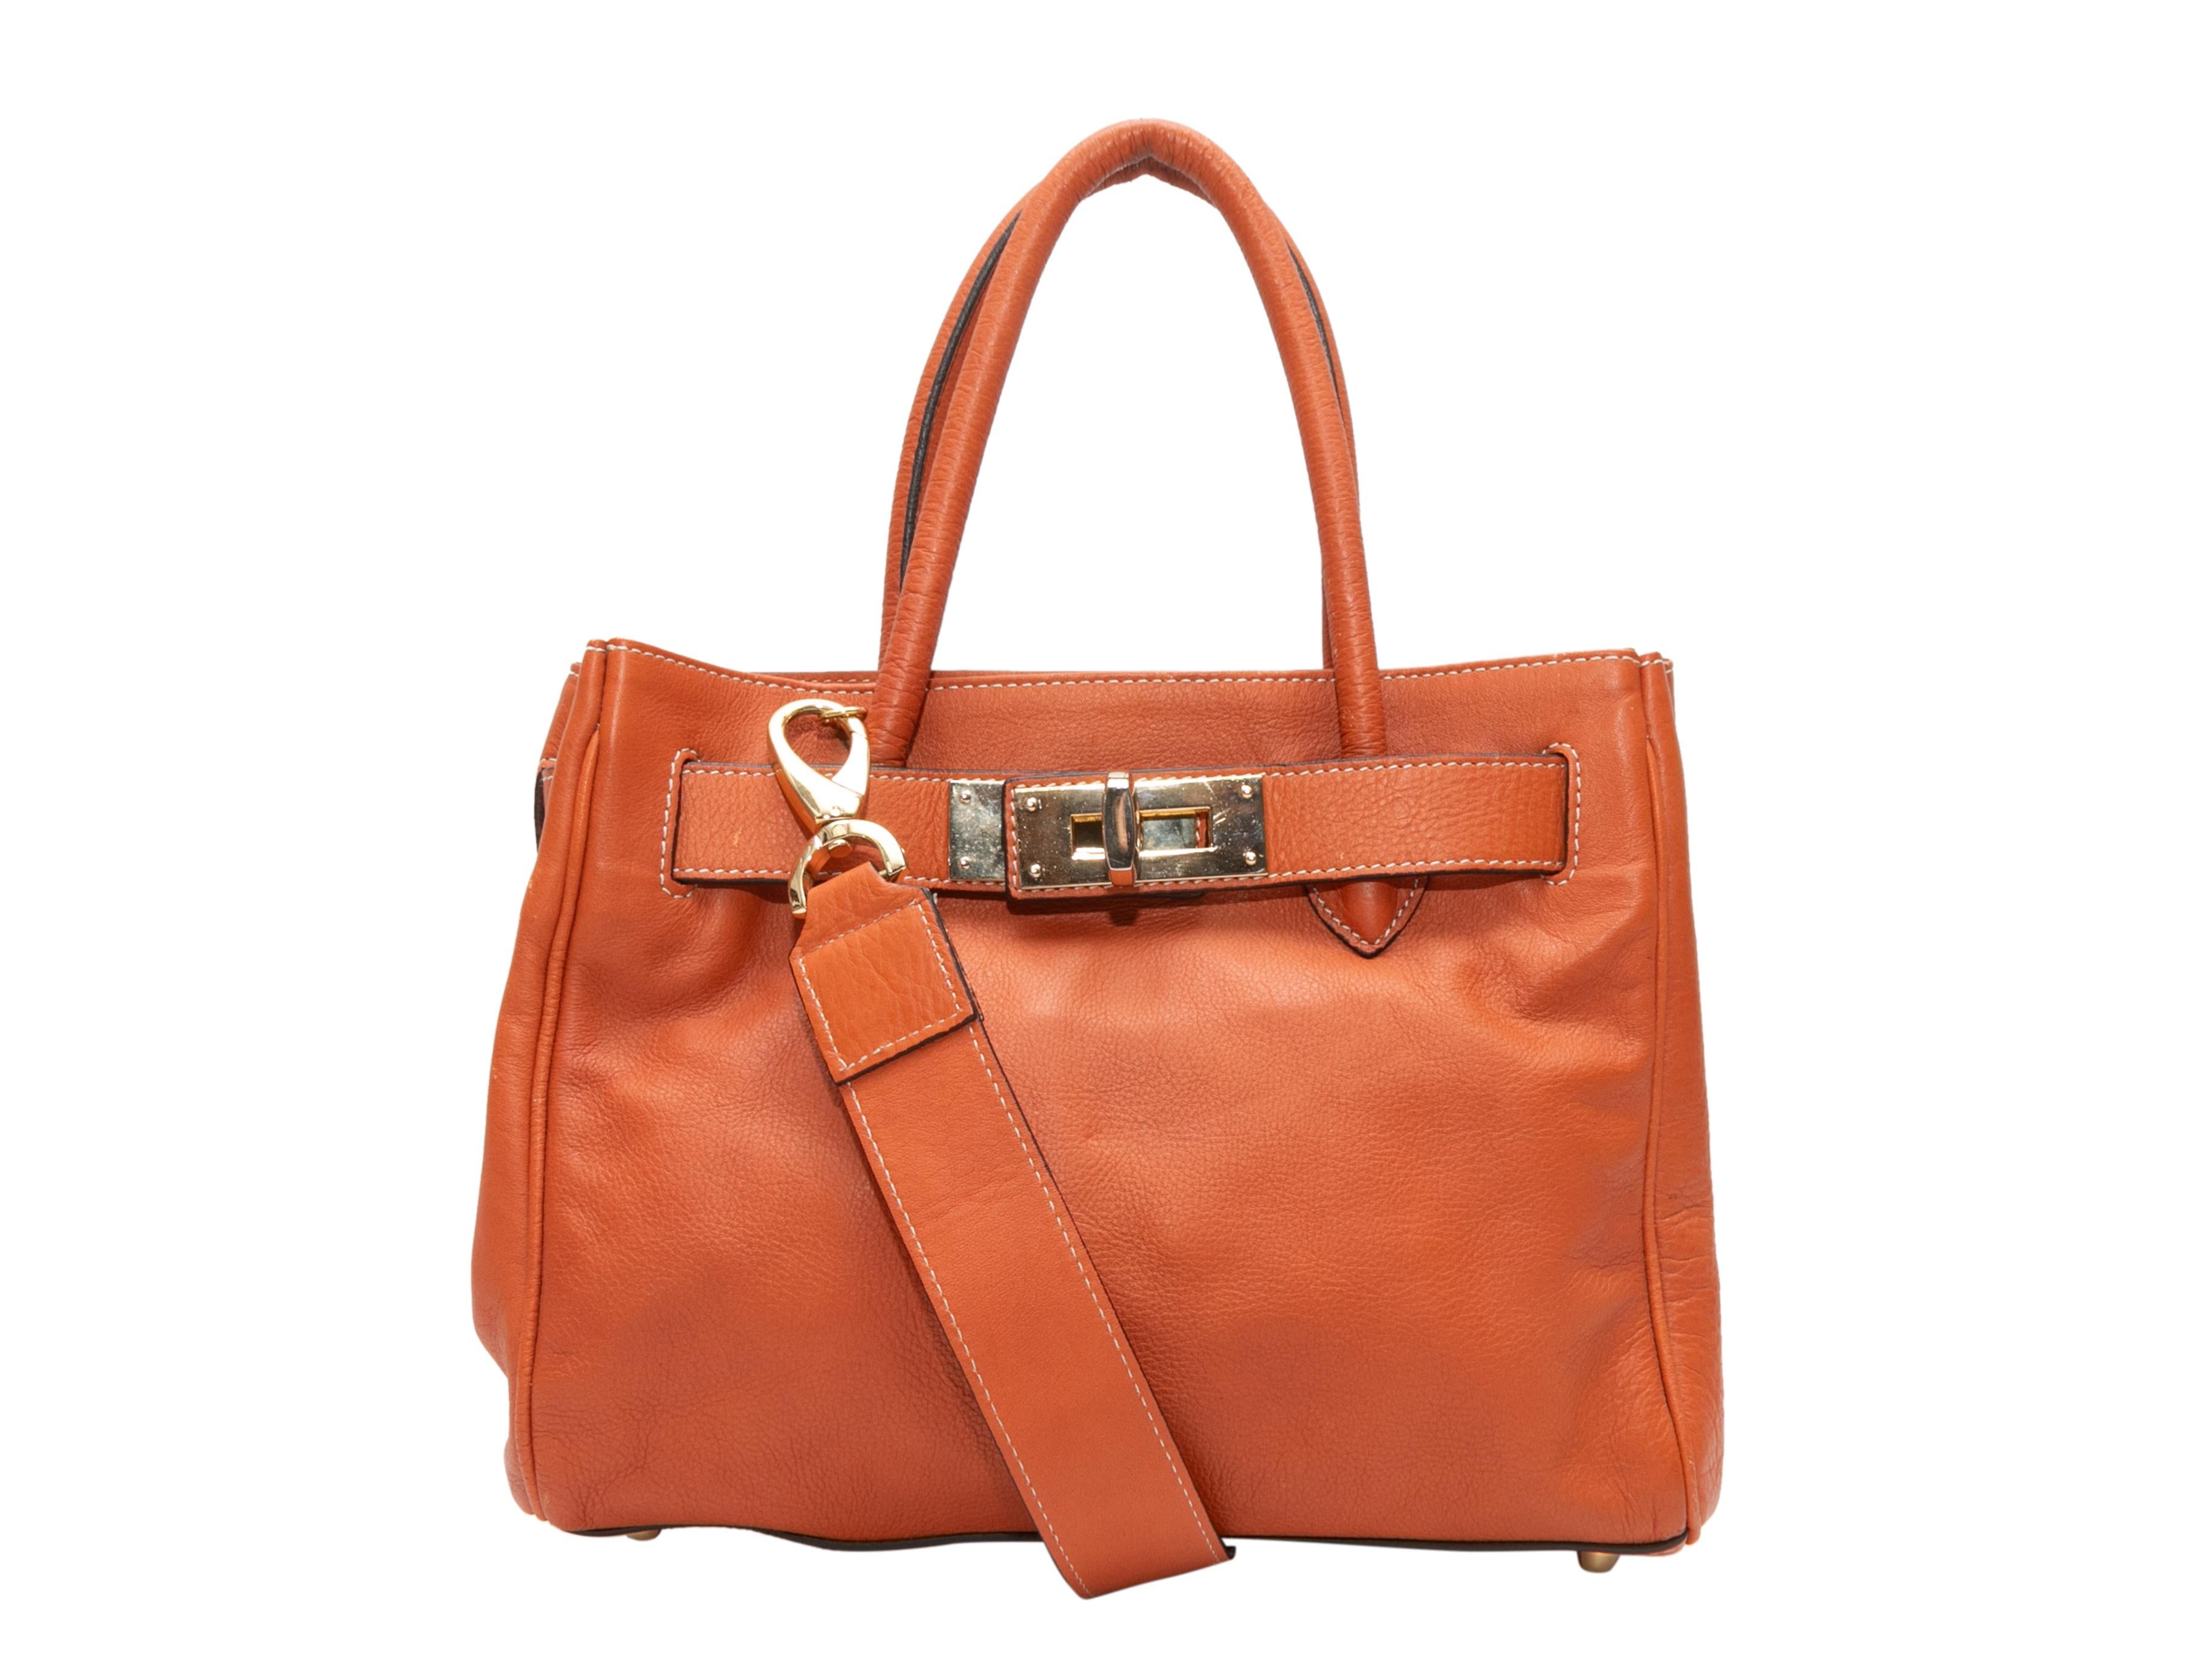 Dark Orange Suarez Small Leather Tote. This tote features a leather body, gold-tone hardware, contrast stitching, dual rolled top handles, an optional flat shoulder strap, and a top clasp closure. 12